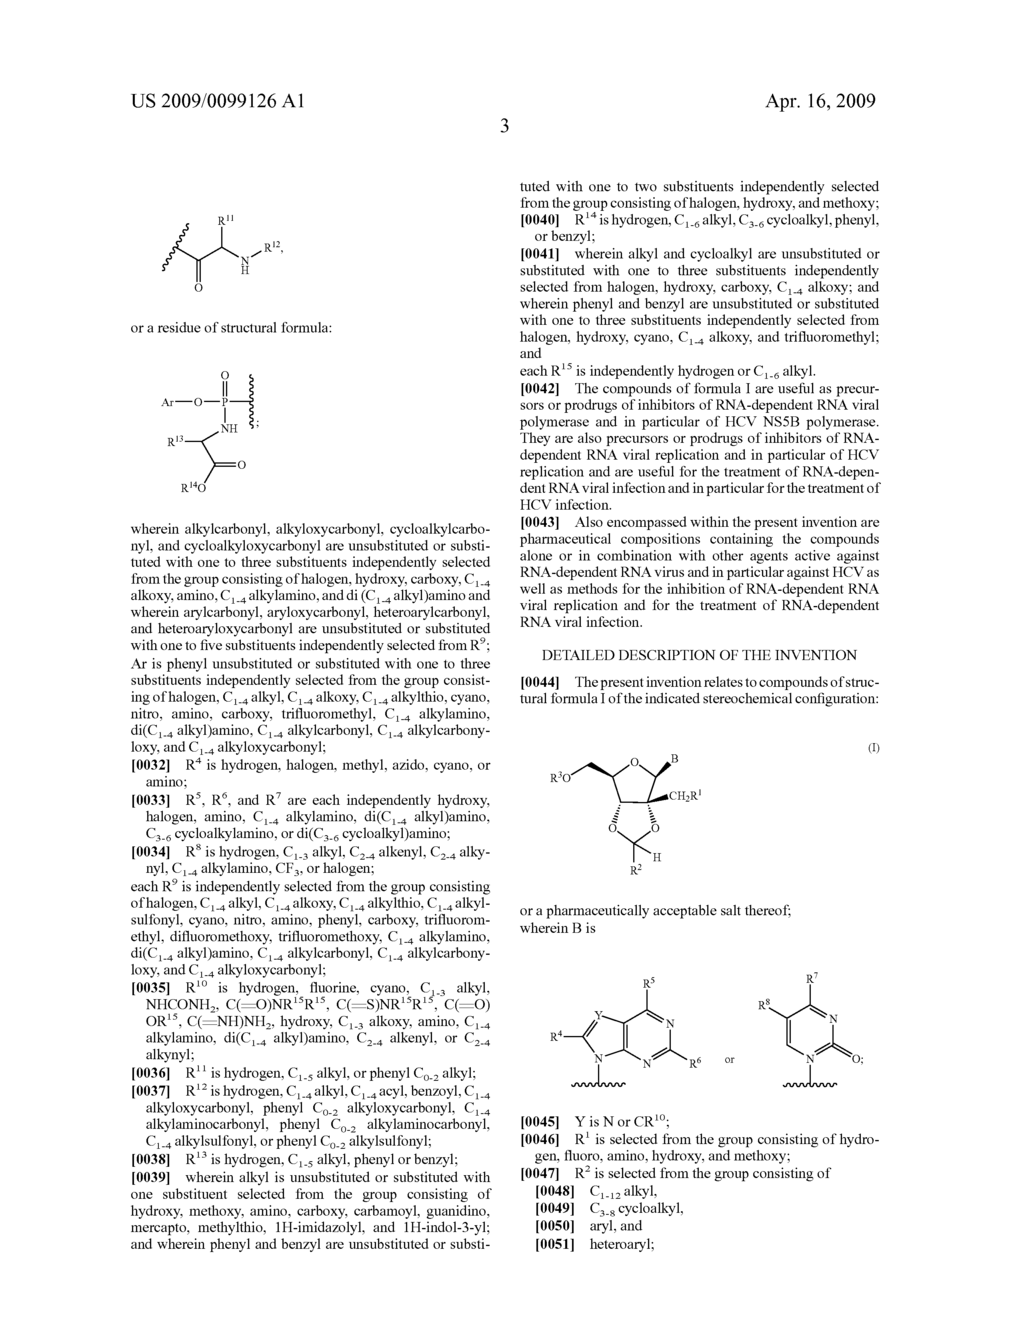 Ribonucleoside Cyclic Acetal Derivatives for the Treatment of RNA-Dependent RNA Viral Infection - diagram, schematic, and image 04